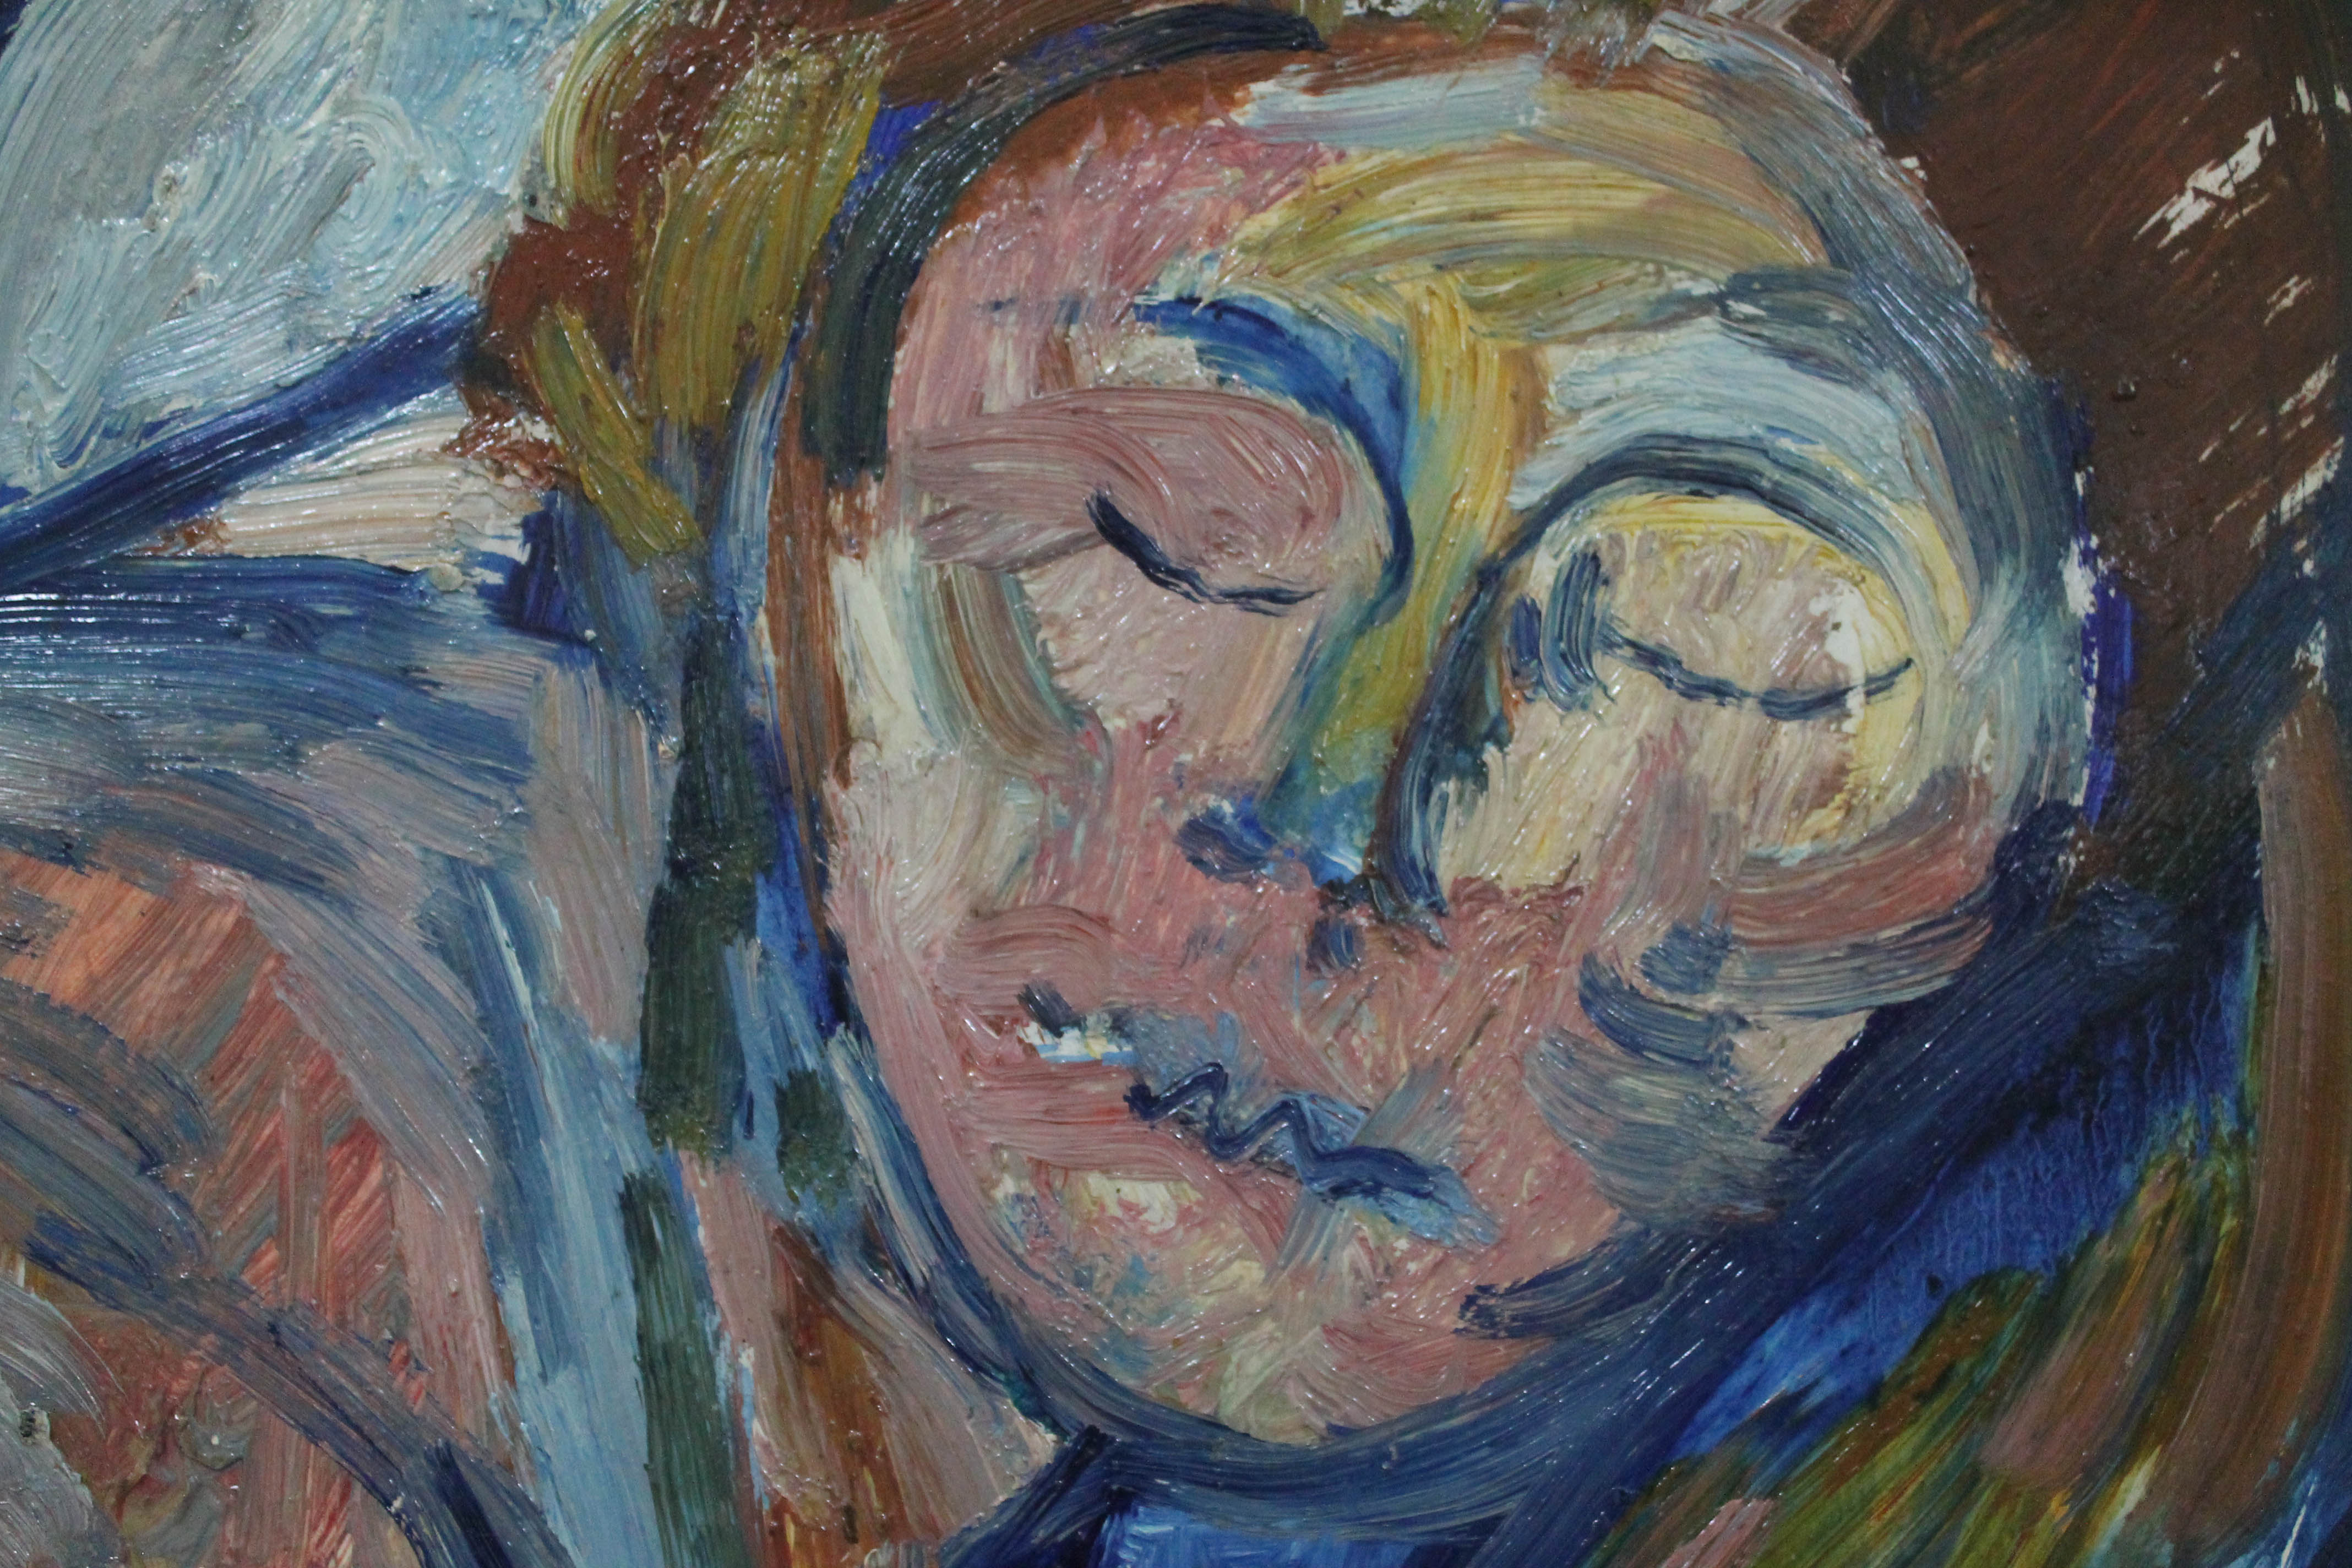 James Lawrence Isherwood (1917-1989), "Sleeping Woman", oil on board, 40.5cm x 50.5cm, titled verso, - Image 5 of 5